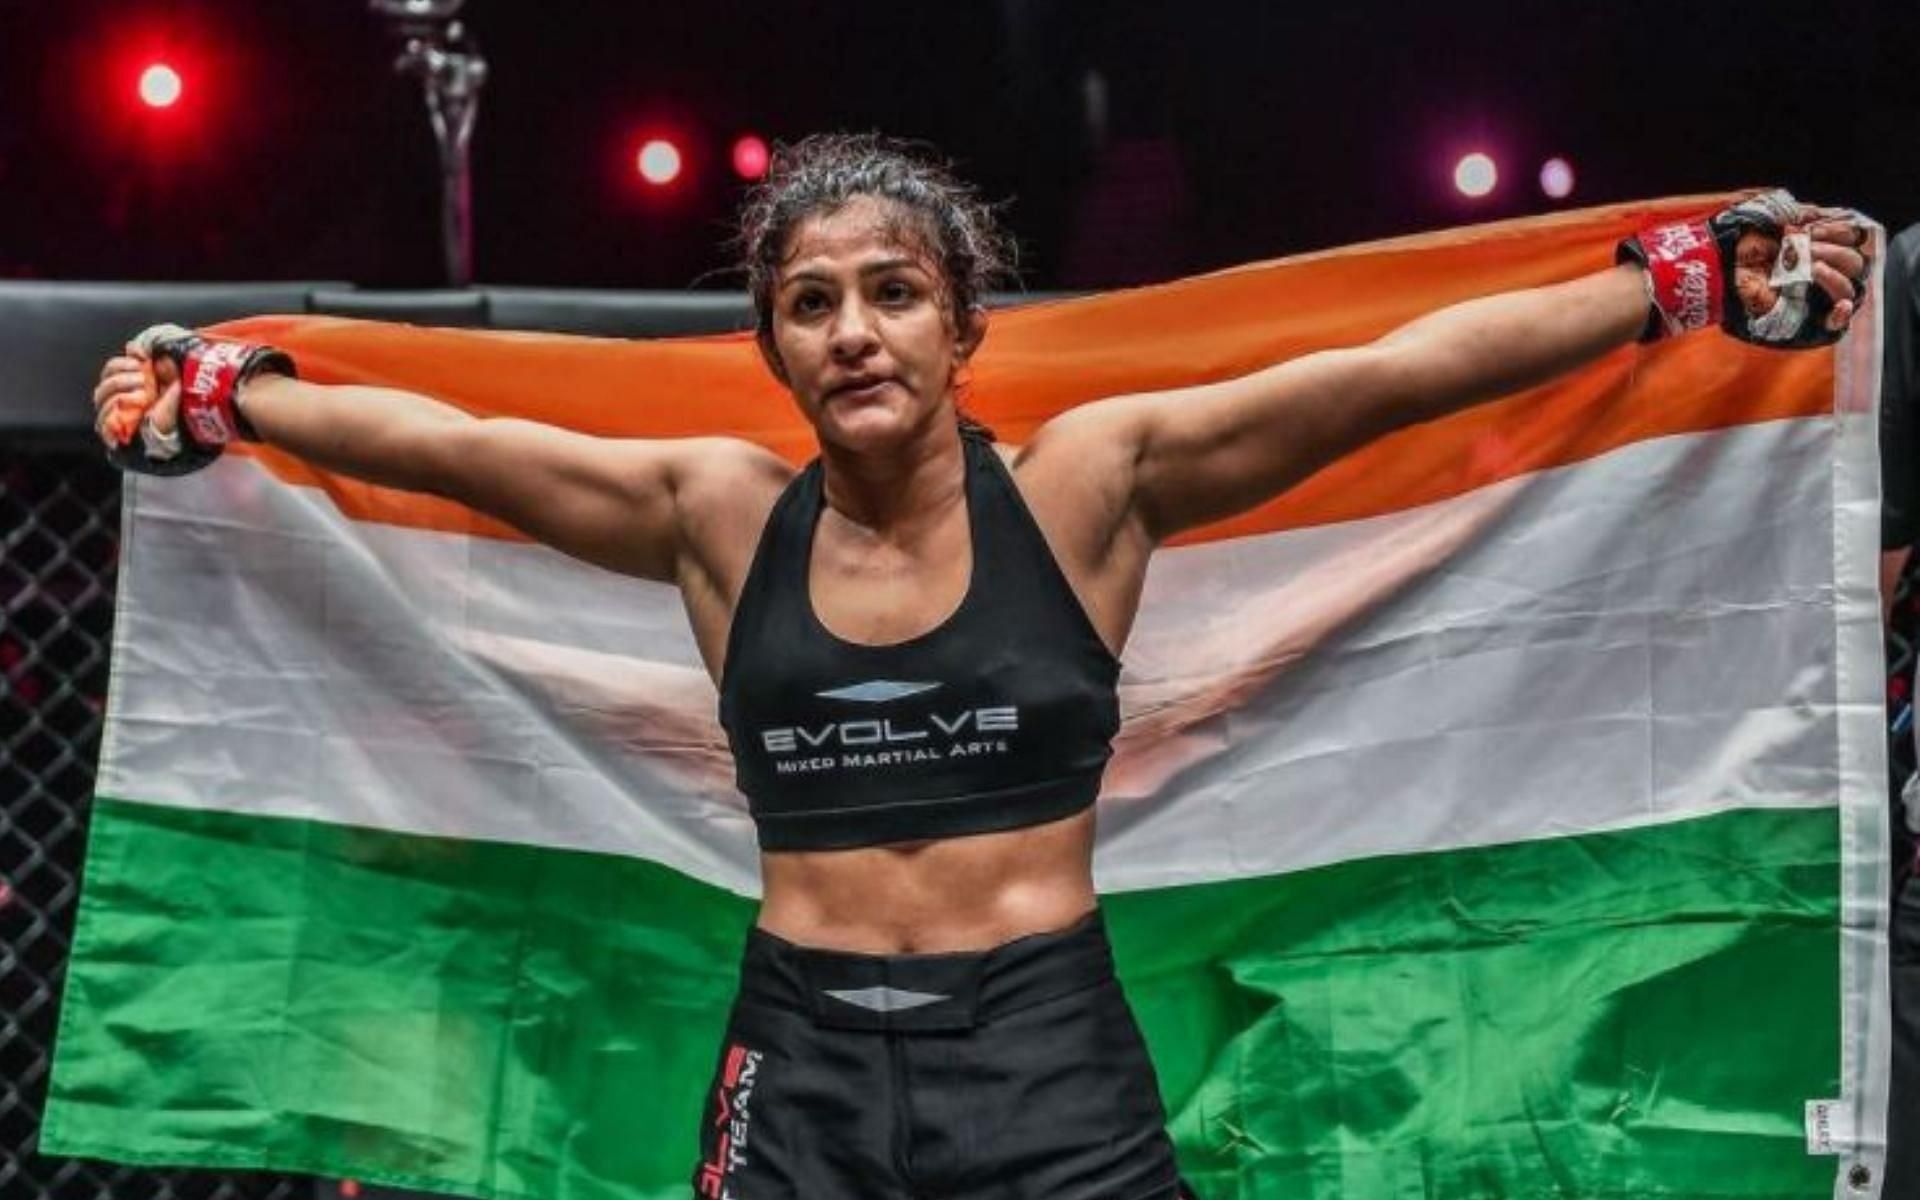 India&#039;s Ritu Phogat will fight Stamp Fairtex in the finals of ONE Championship atomweight Grand Prix on December 3 at ONE: Winter Warriors. (Image Credit: @rituphogat48 on Instagram)